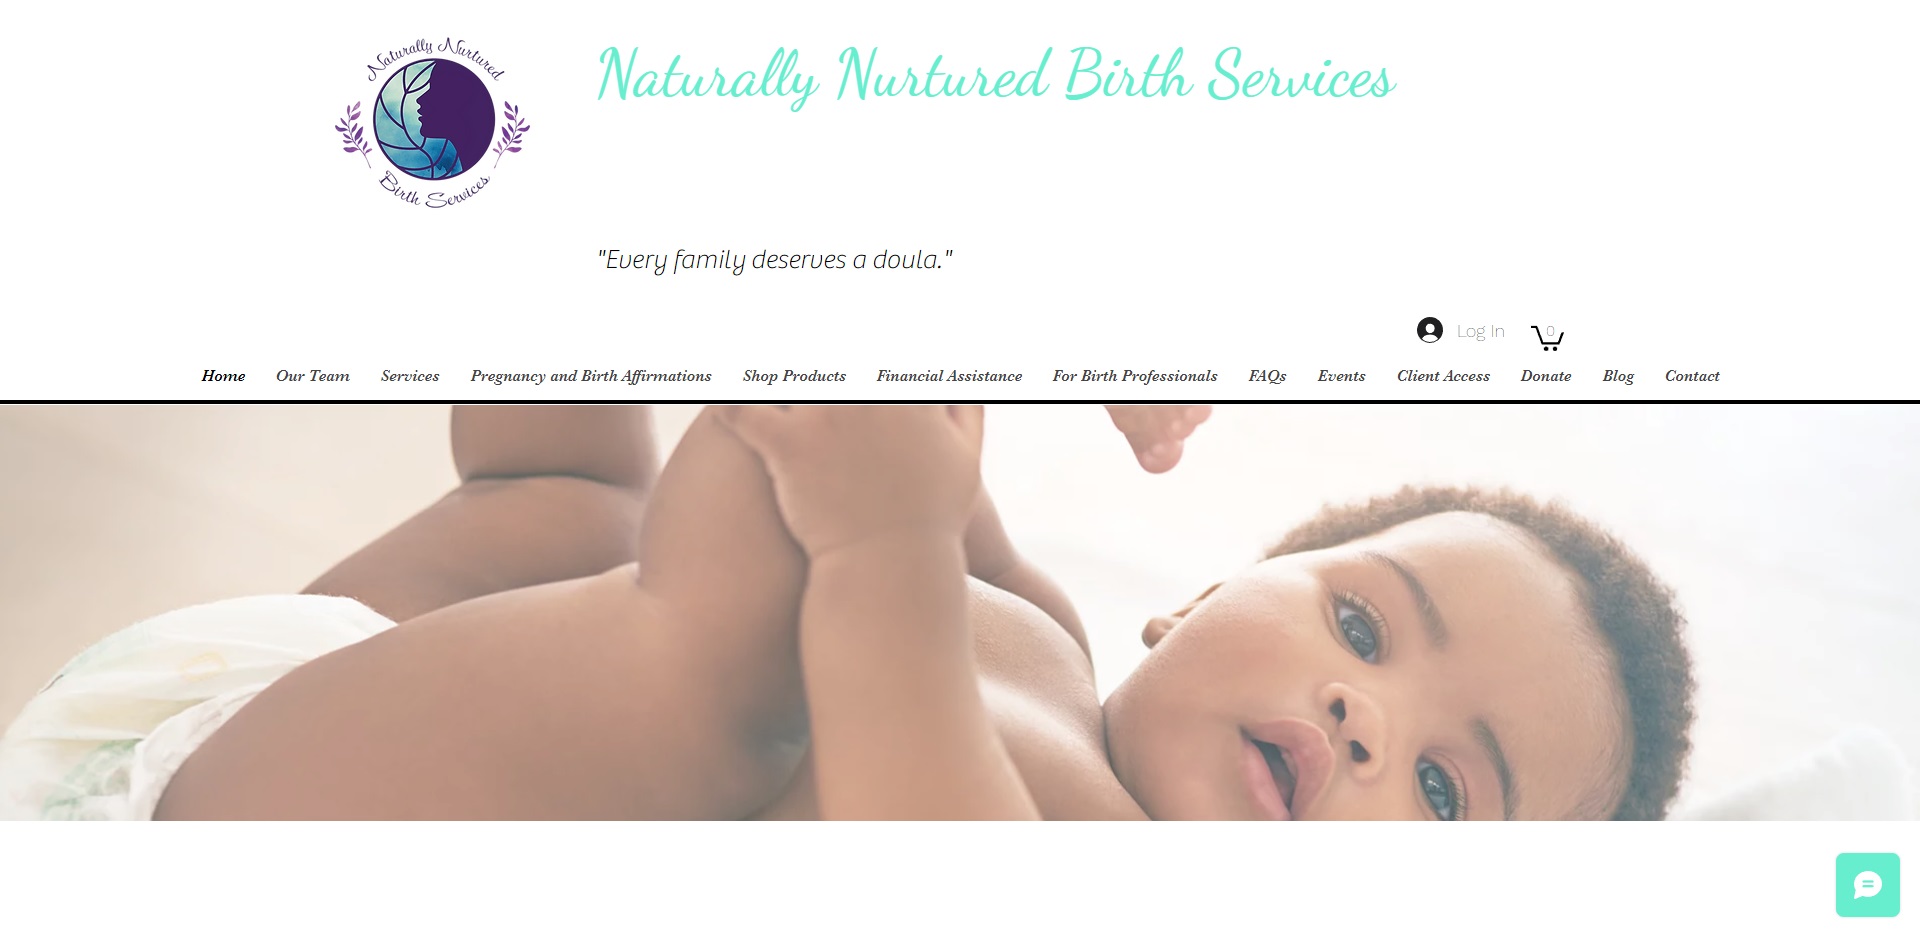 Best Maternity Services in Memphis, TN